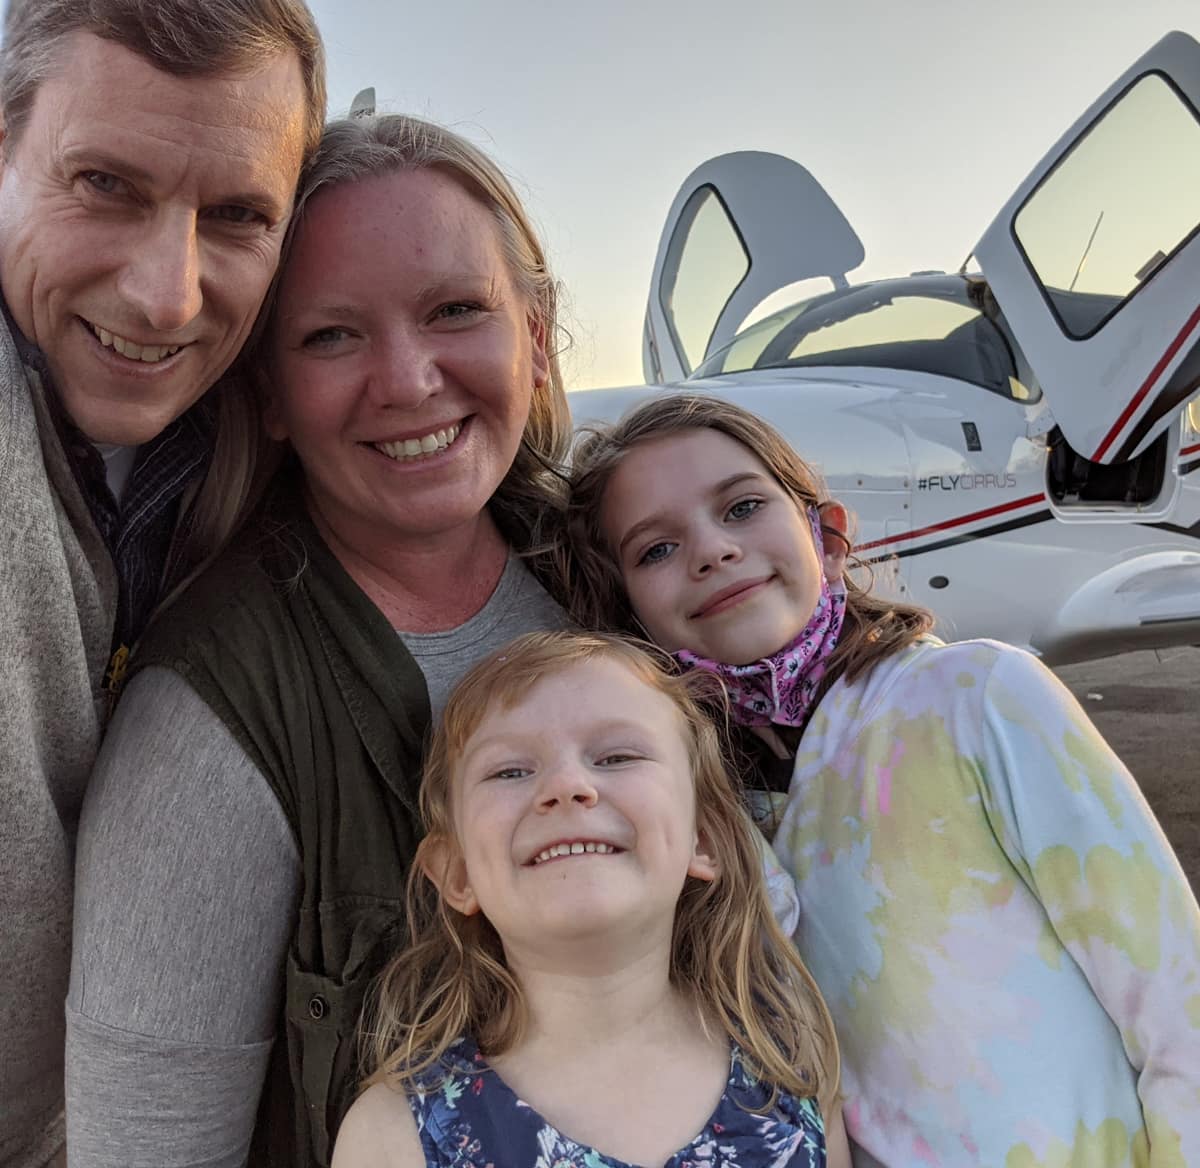 Along with his wife Deb Gregory and their two daughters, Dr. James W. Gregory, new dean of the College of Engineering on Embry-Riddle’s Daytona Beach Campus, will be relocating to the area in time for the fall 2021 semester.